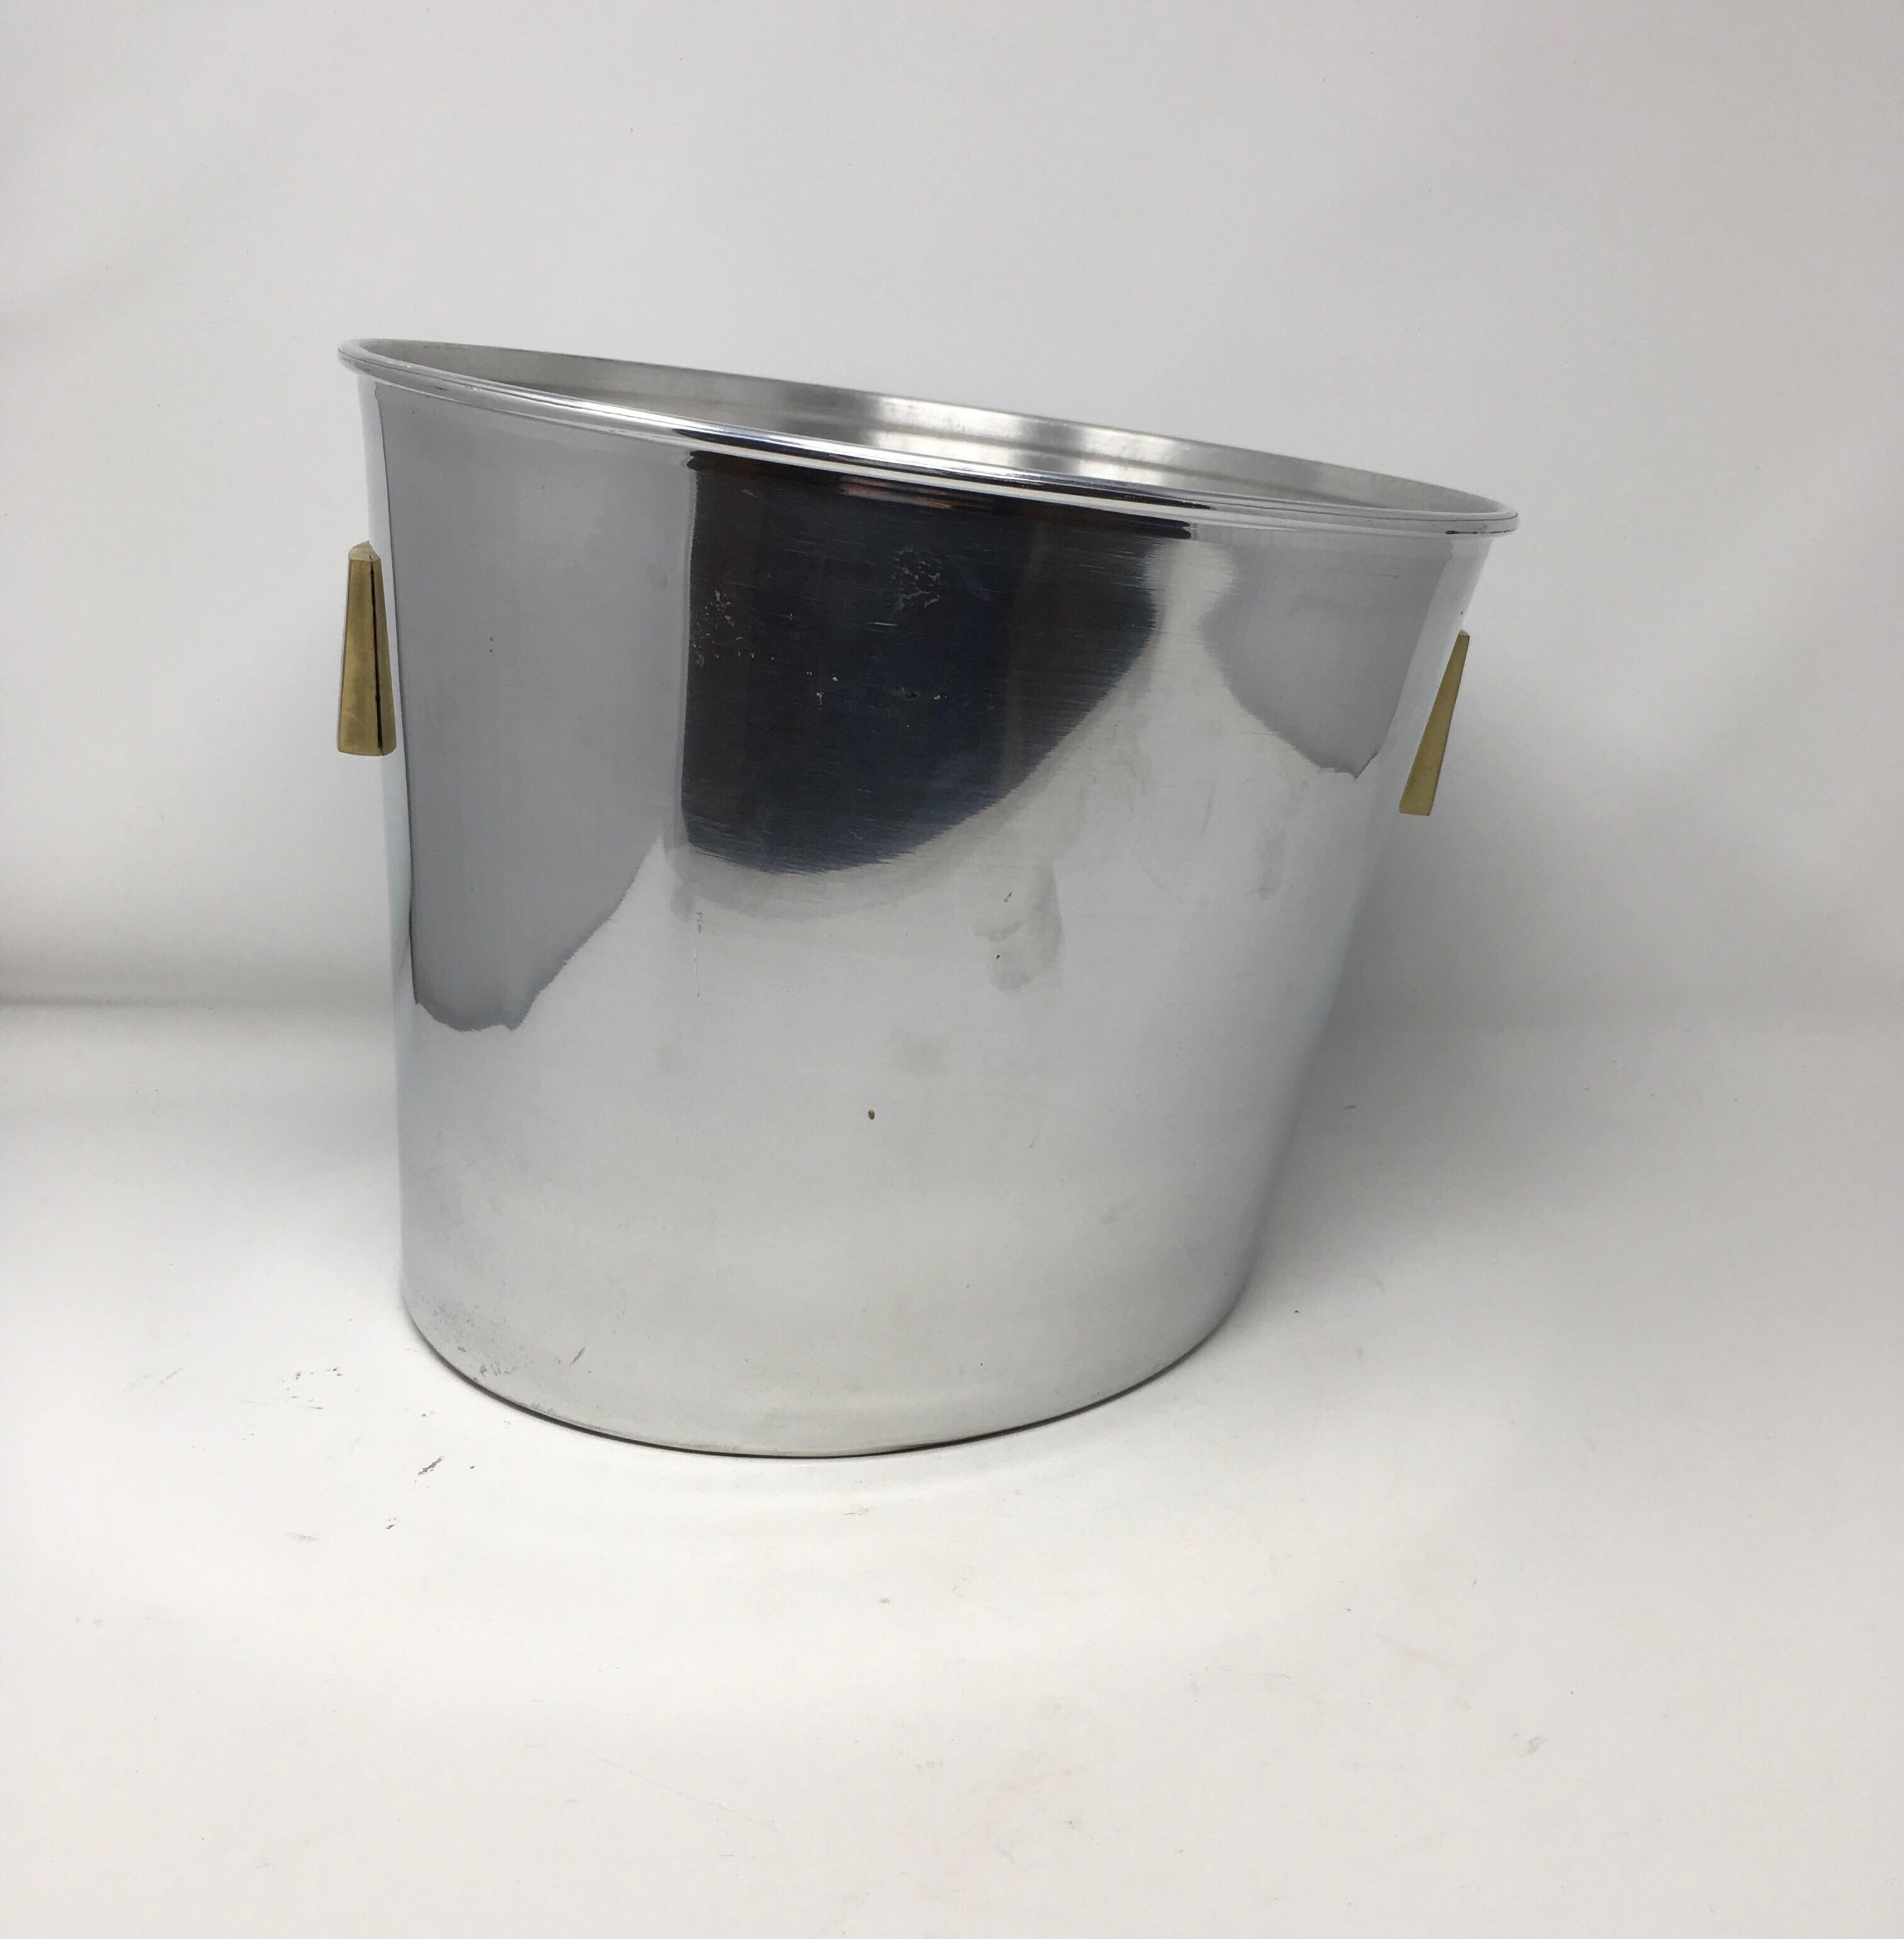 This Grand Deutz champagne bucket holds three standard bottles or a Magnum. The original aluminum cooler, made in France for the famous Deutz champagne grower in AY, has an unusual oblique shape and brass labels on both sides. Would be a beautiful